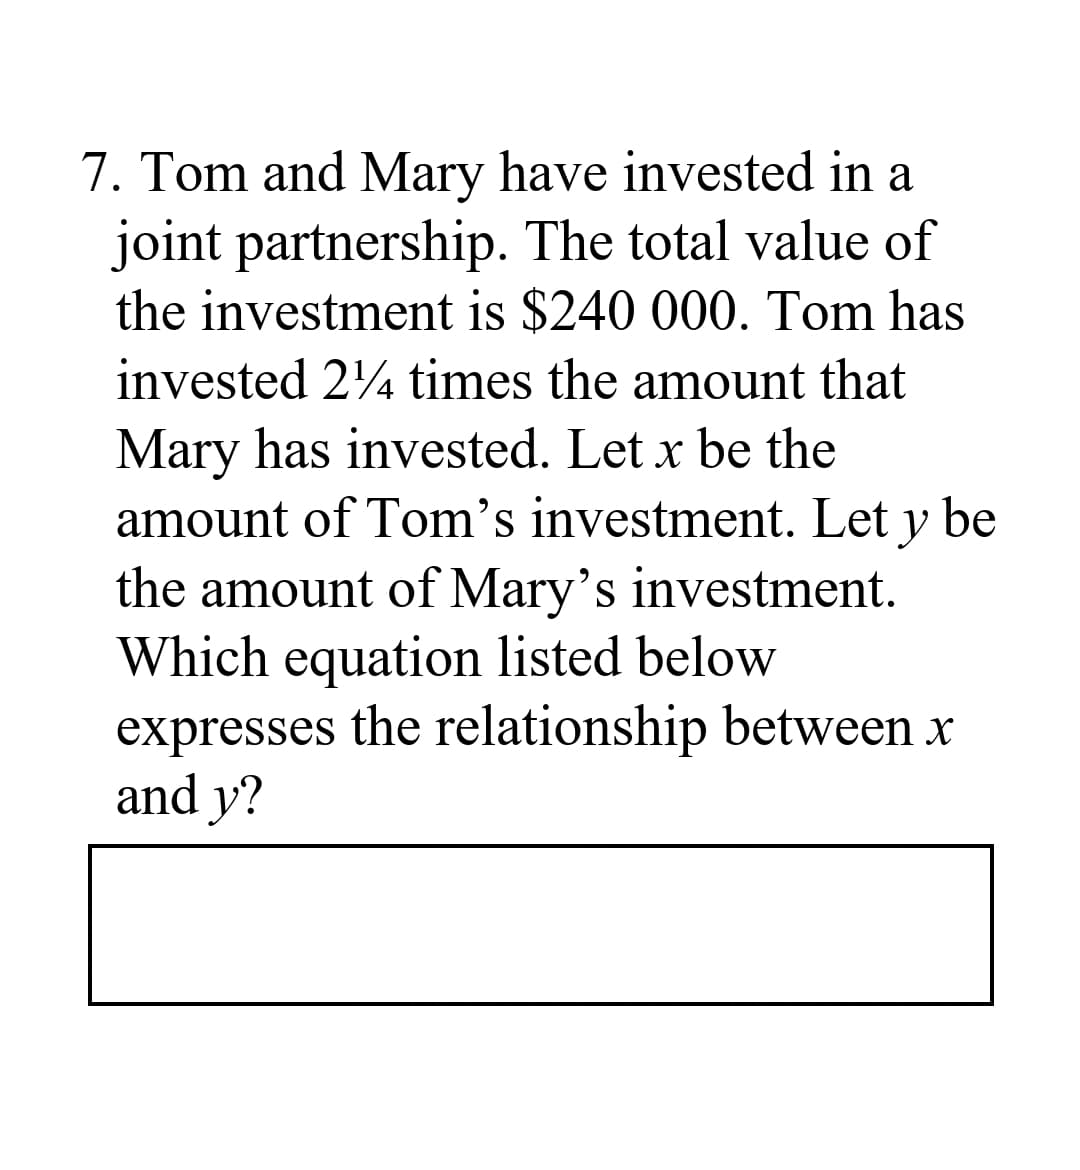 7. Tom and Mary have invested in a
joint partnership. The total value of
the investment is $240 000. Tom has
invested 24 times the amount that
Mary has invested. Let x be the
amount of Tom's investment. Let y be
the amount of Mary's investment.
Which equation listed below
expresses the relationship between x
and y?
